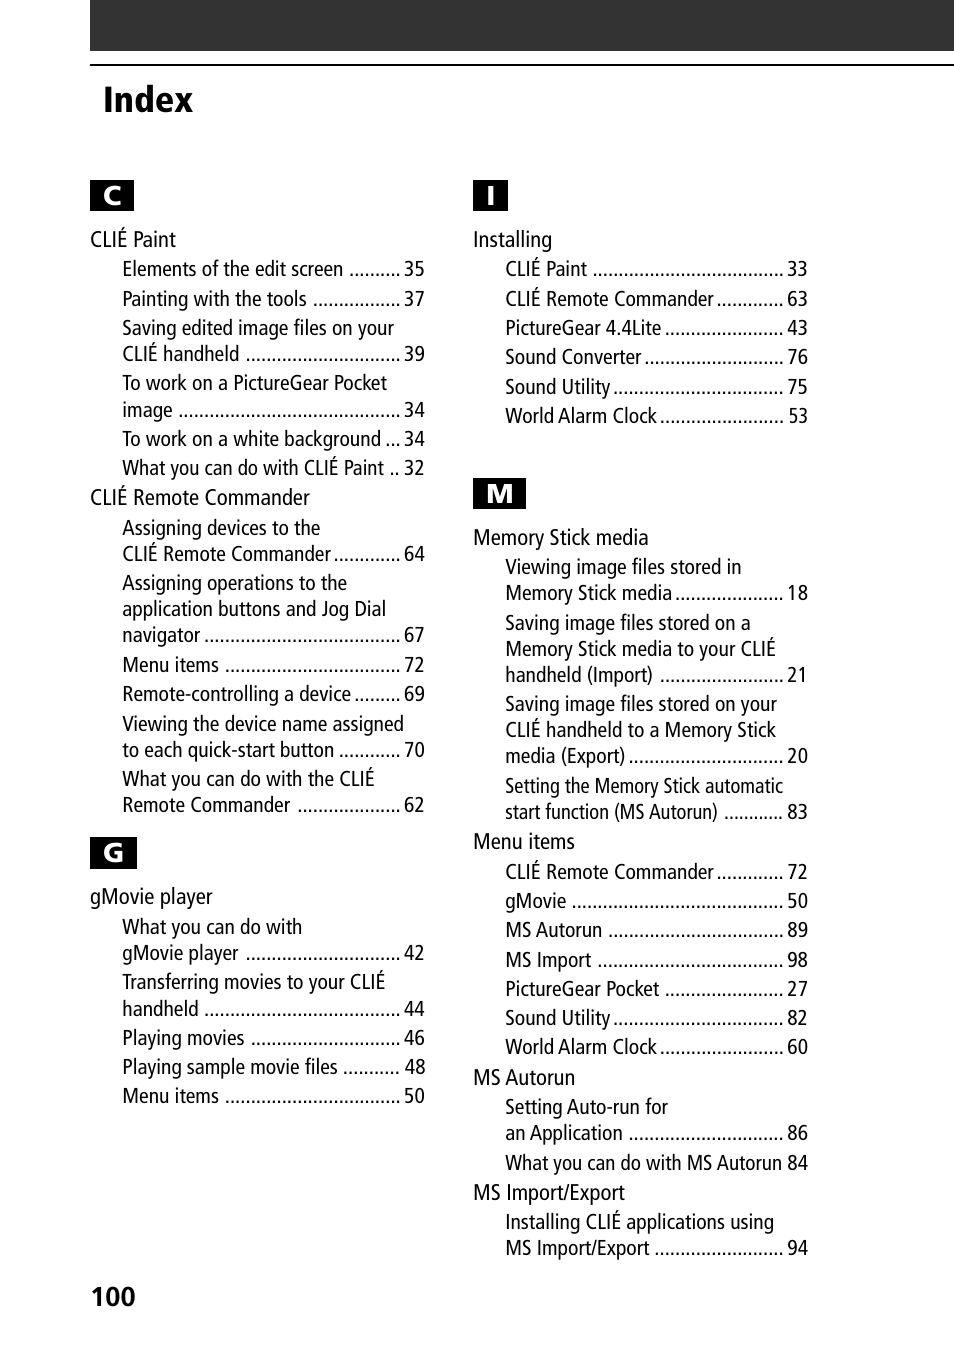 Index, 100 c | Sony PEG-T615C User Manual | Page 100 / 104